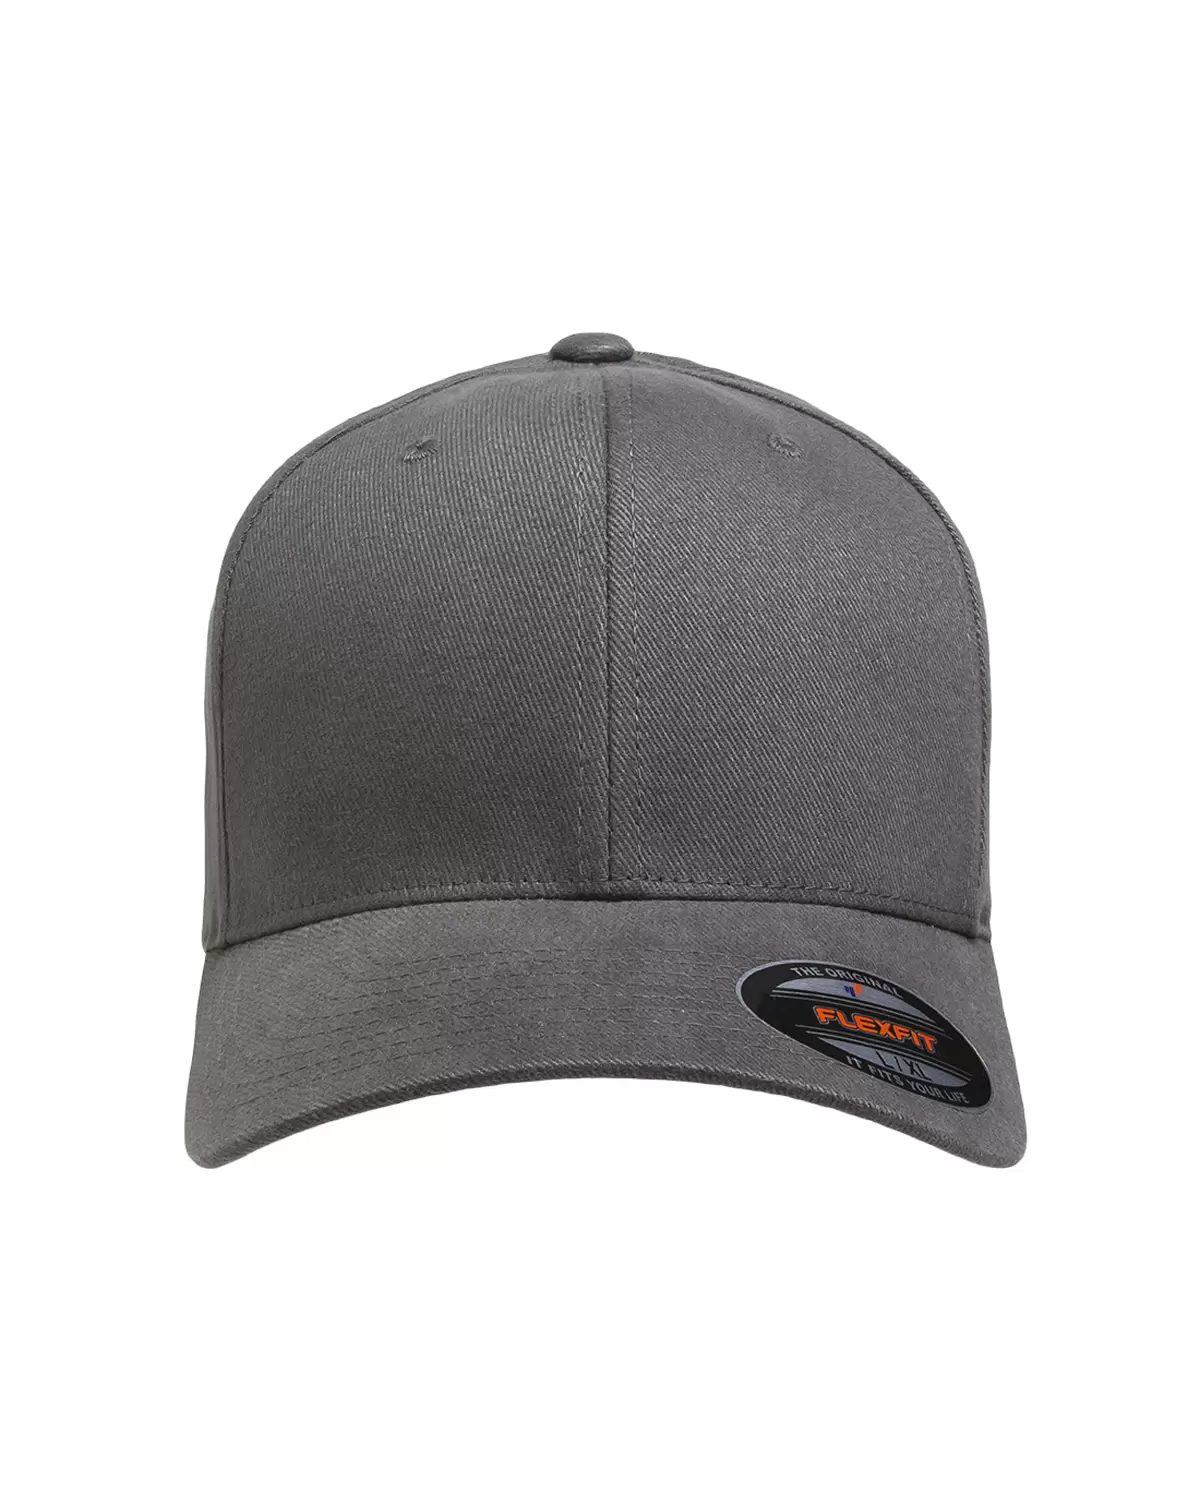 Flexfit 6377 Brushed Twill Cap - From